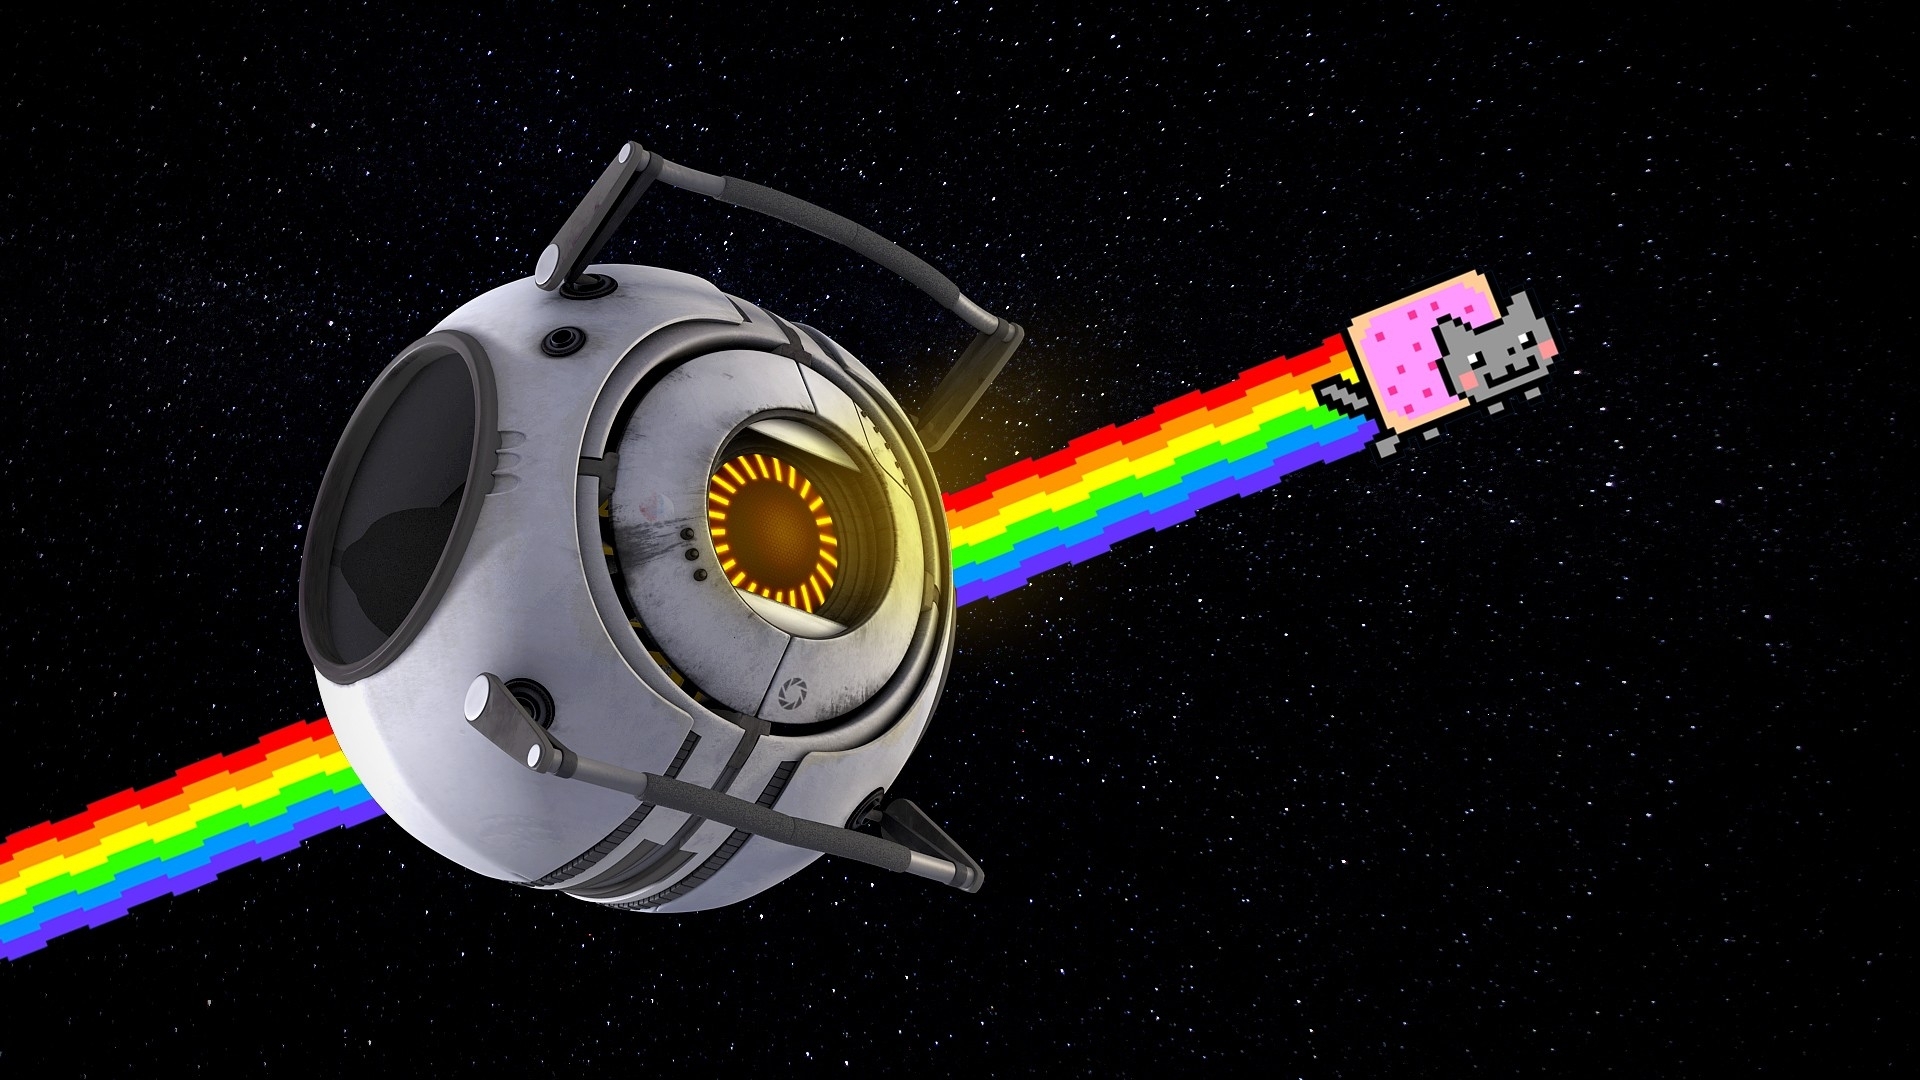 nyan cat lost in space download pc windows 7